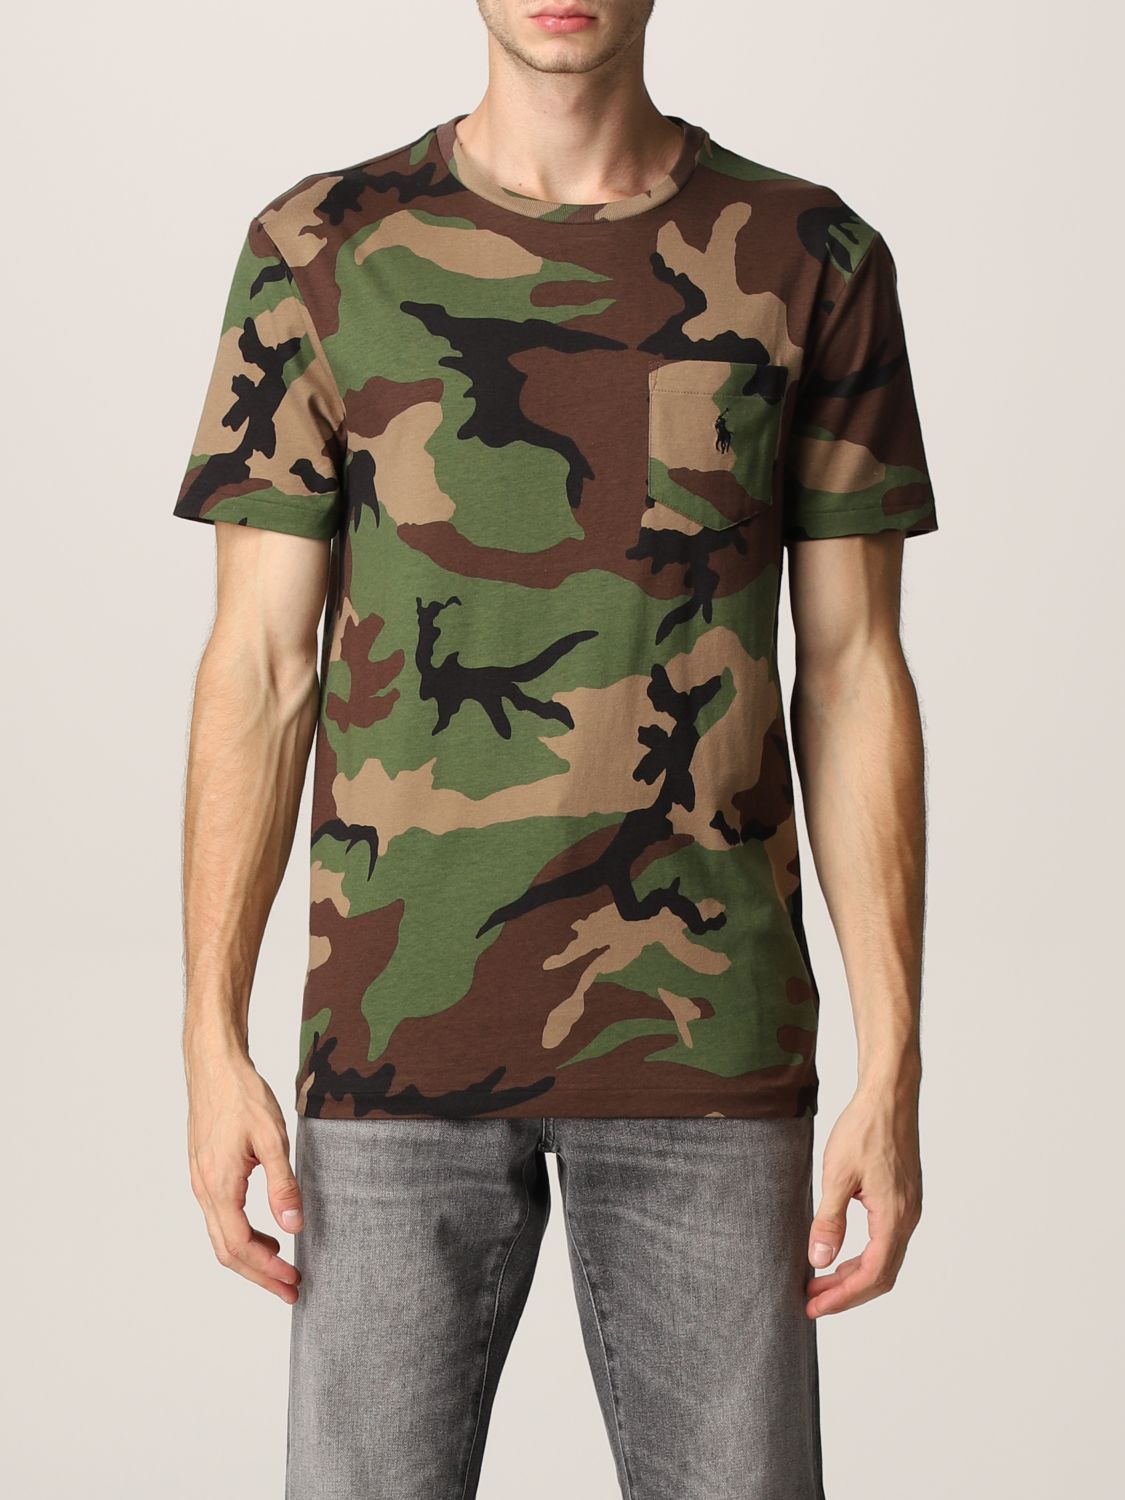 POLO RALPH LAUREN: t-shirt in camouflage cotton - Military | Polo Ralph  Lauren t-shirt 710812948 online on 